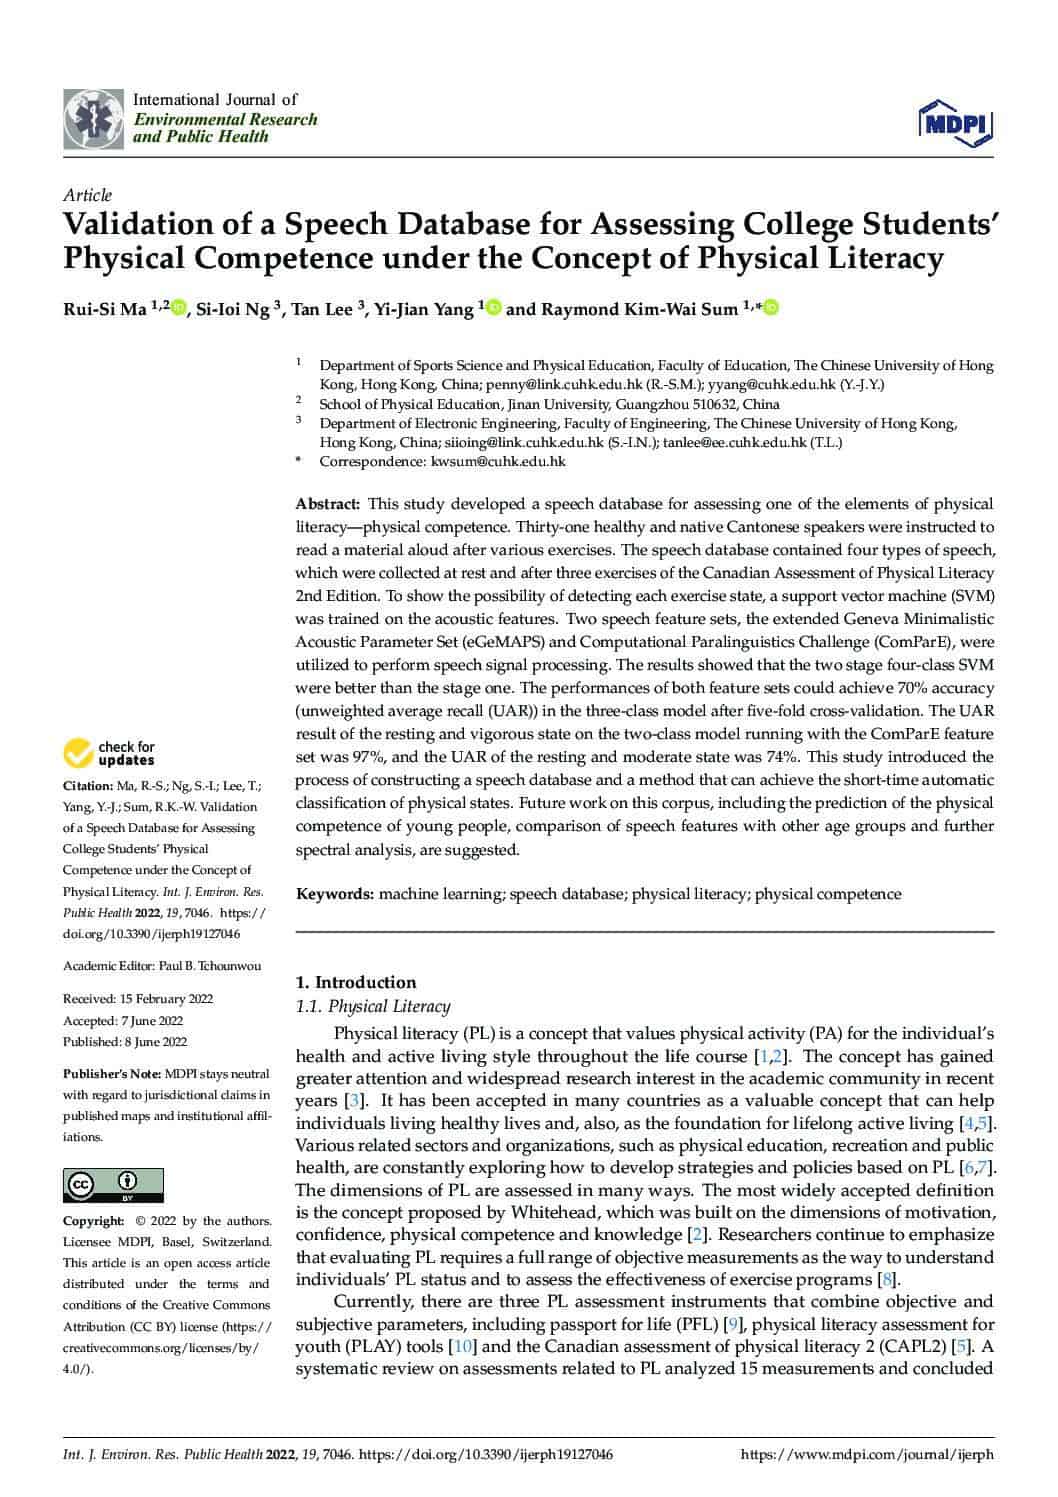 Validation of a Speech Database for Assessing College Students’ Physical Competence under the Concept of Physical Literacy